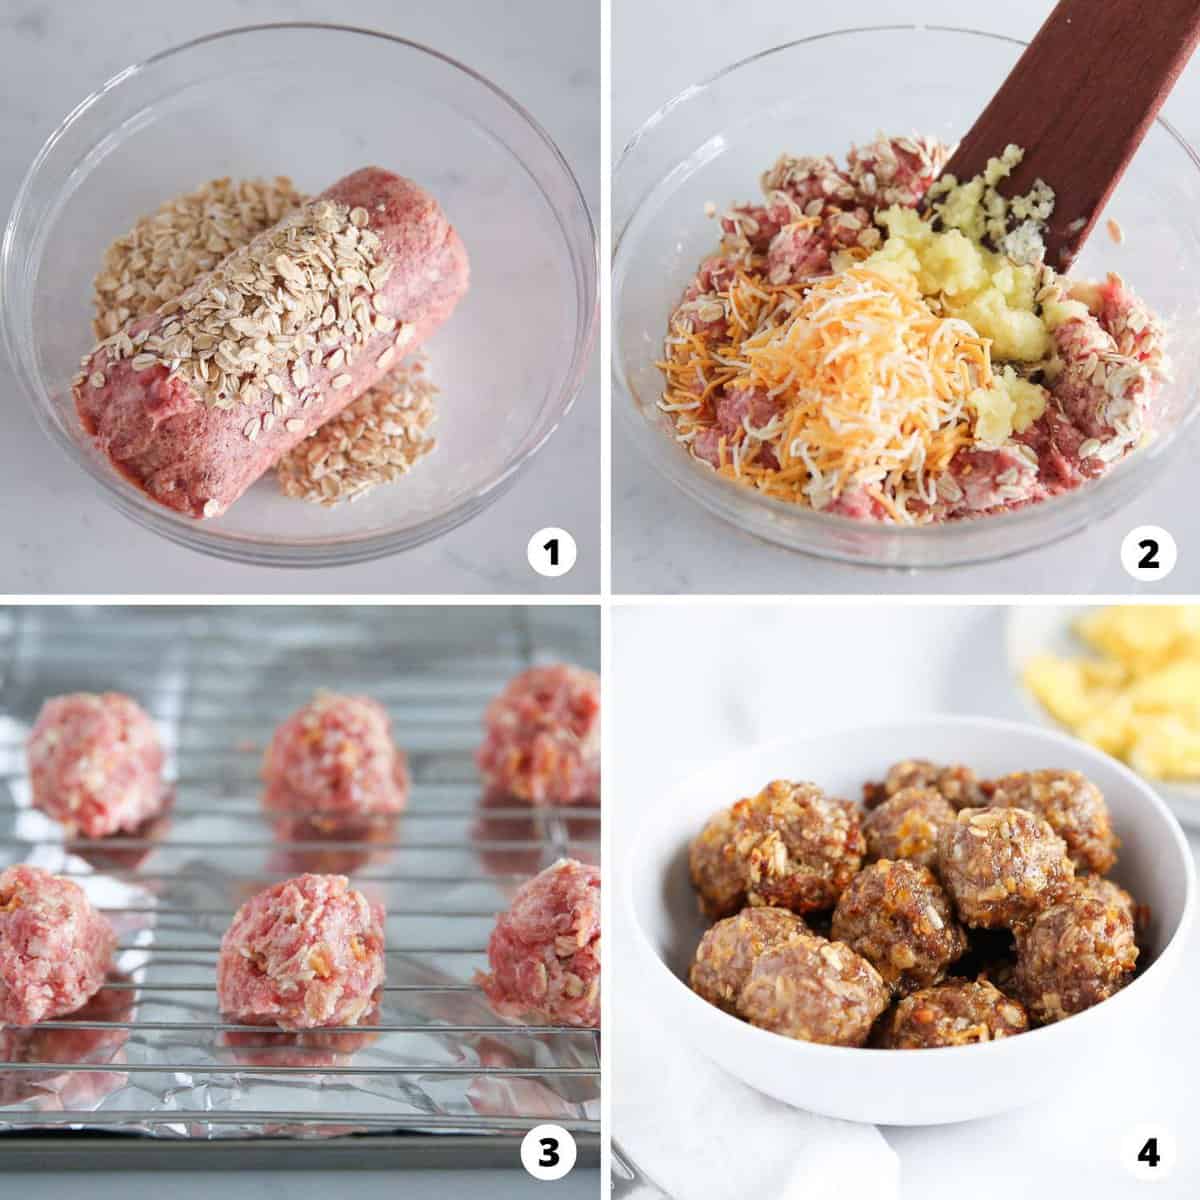 Showing how to make breakfast meatballs in a 4 step collage.